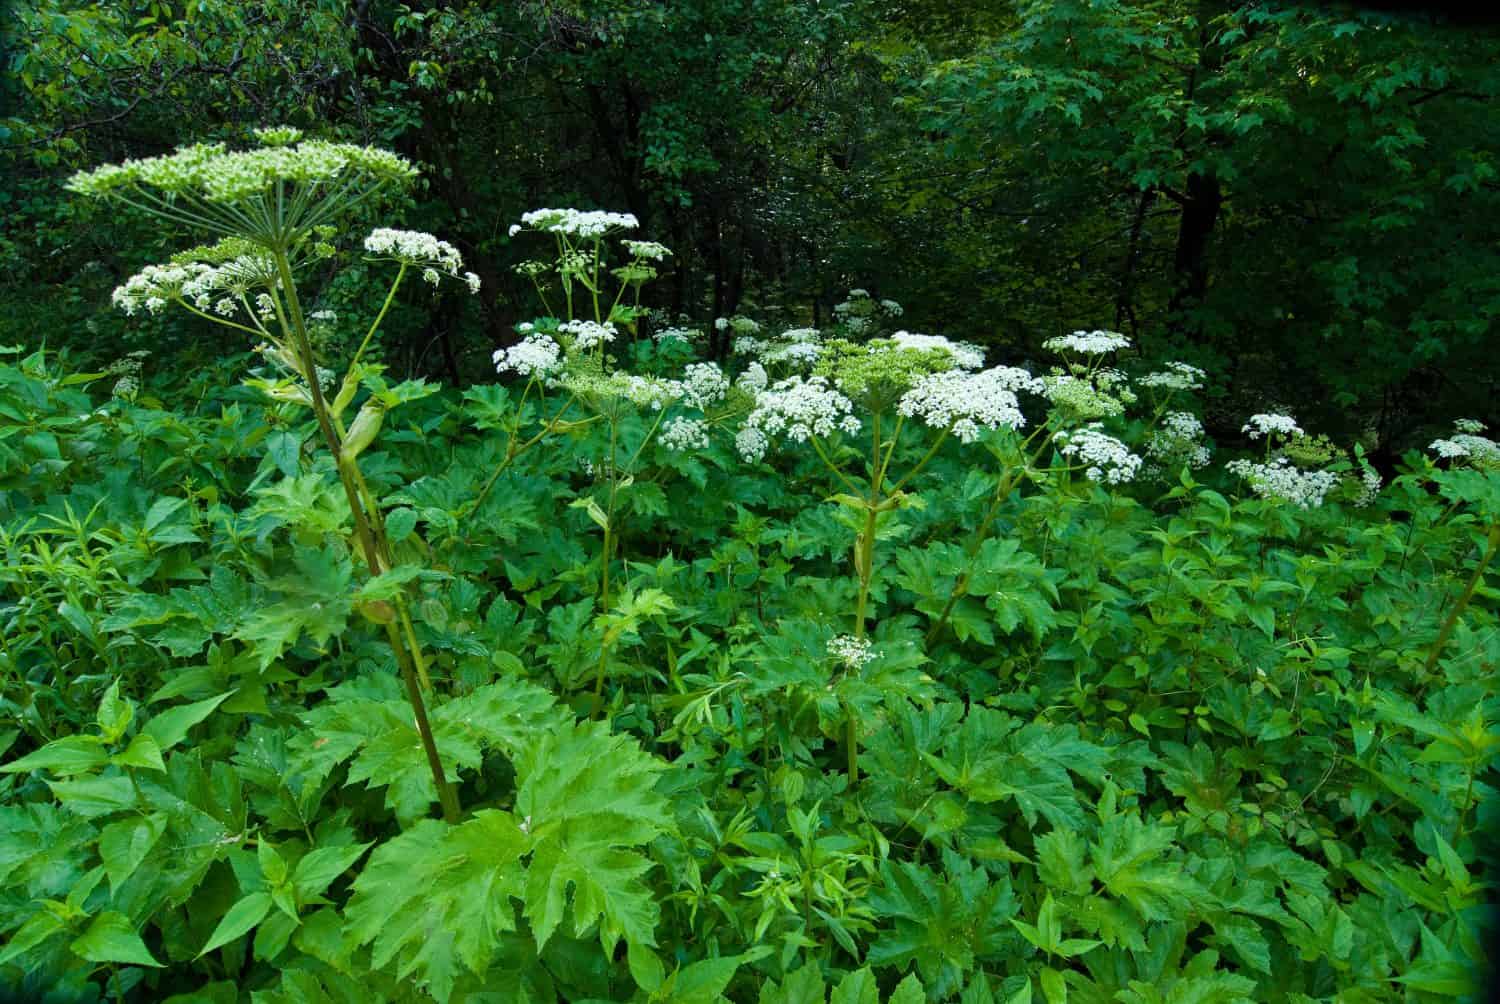 Cow-parsnip (Heracleum maximum) in forest clearing in Shenandoah National Park, Virginia. Only member of the hogweed genus native to North America. Plant reaches more than six feet (3 m) tall.